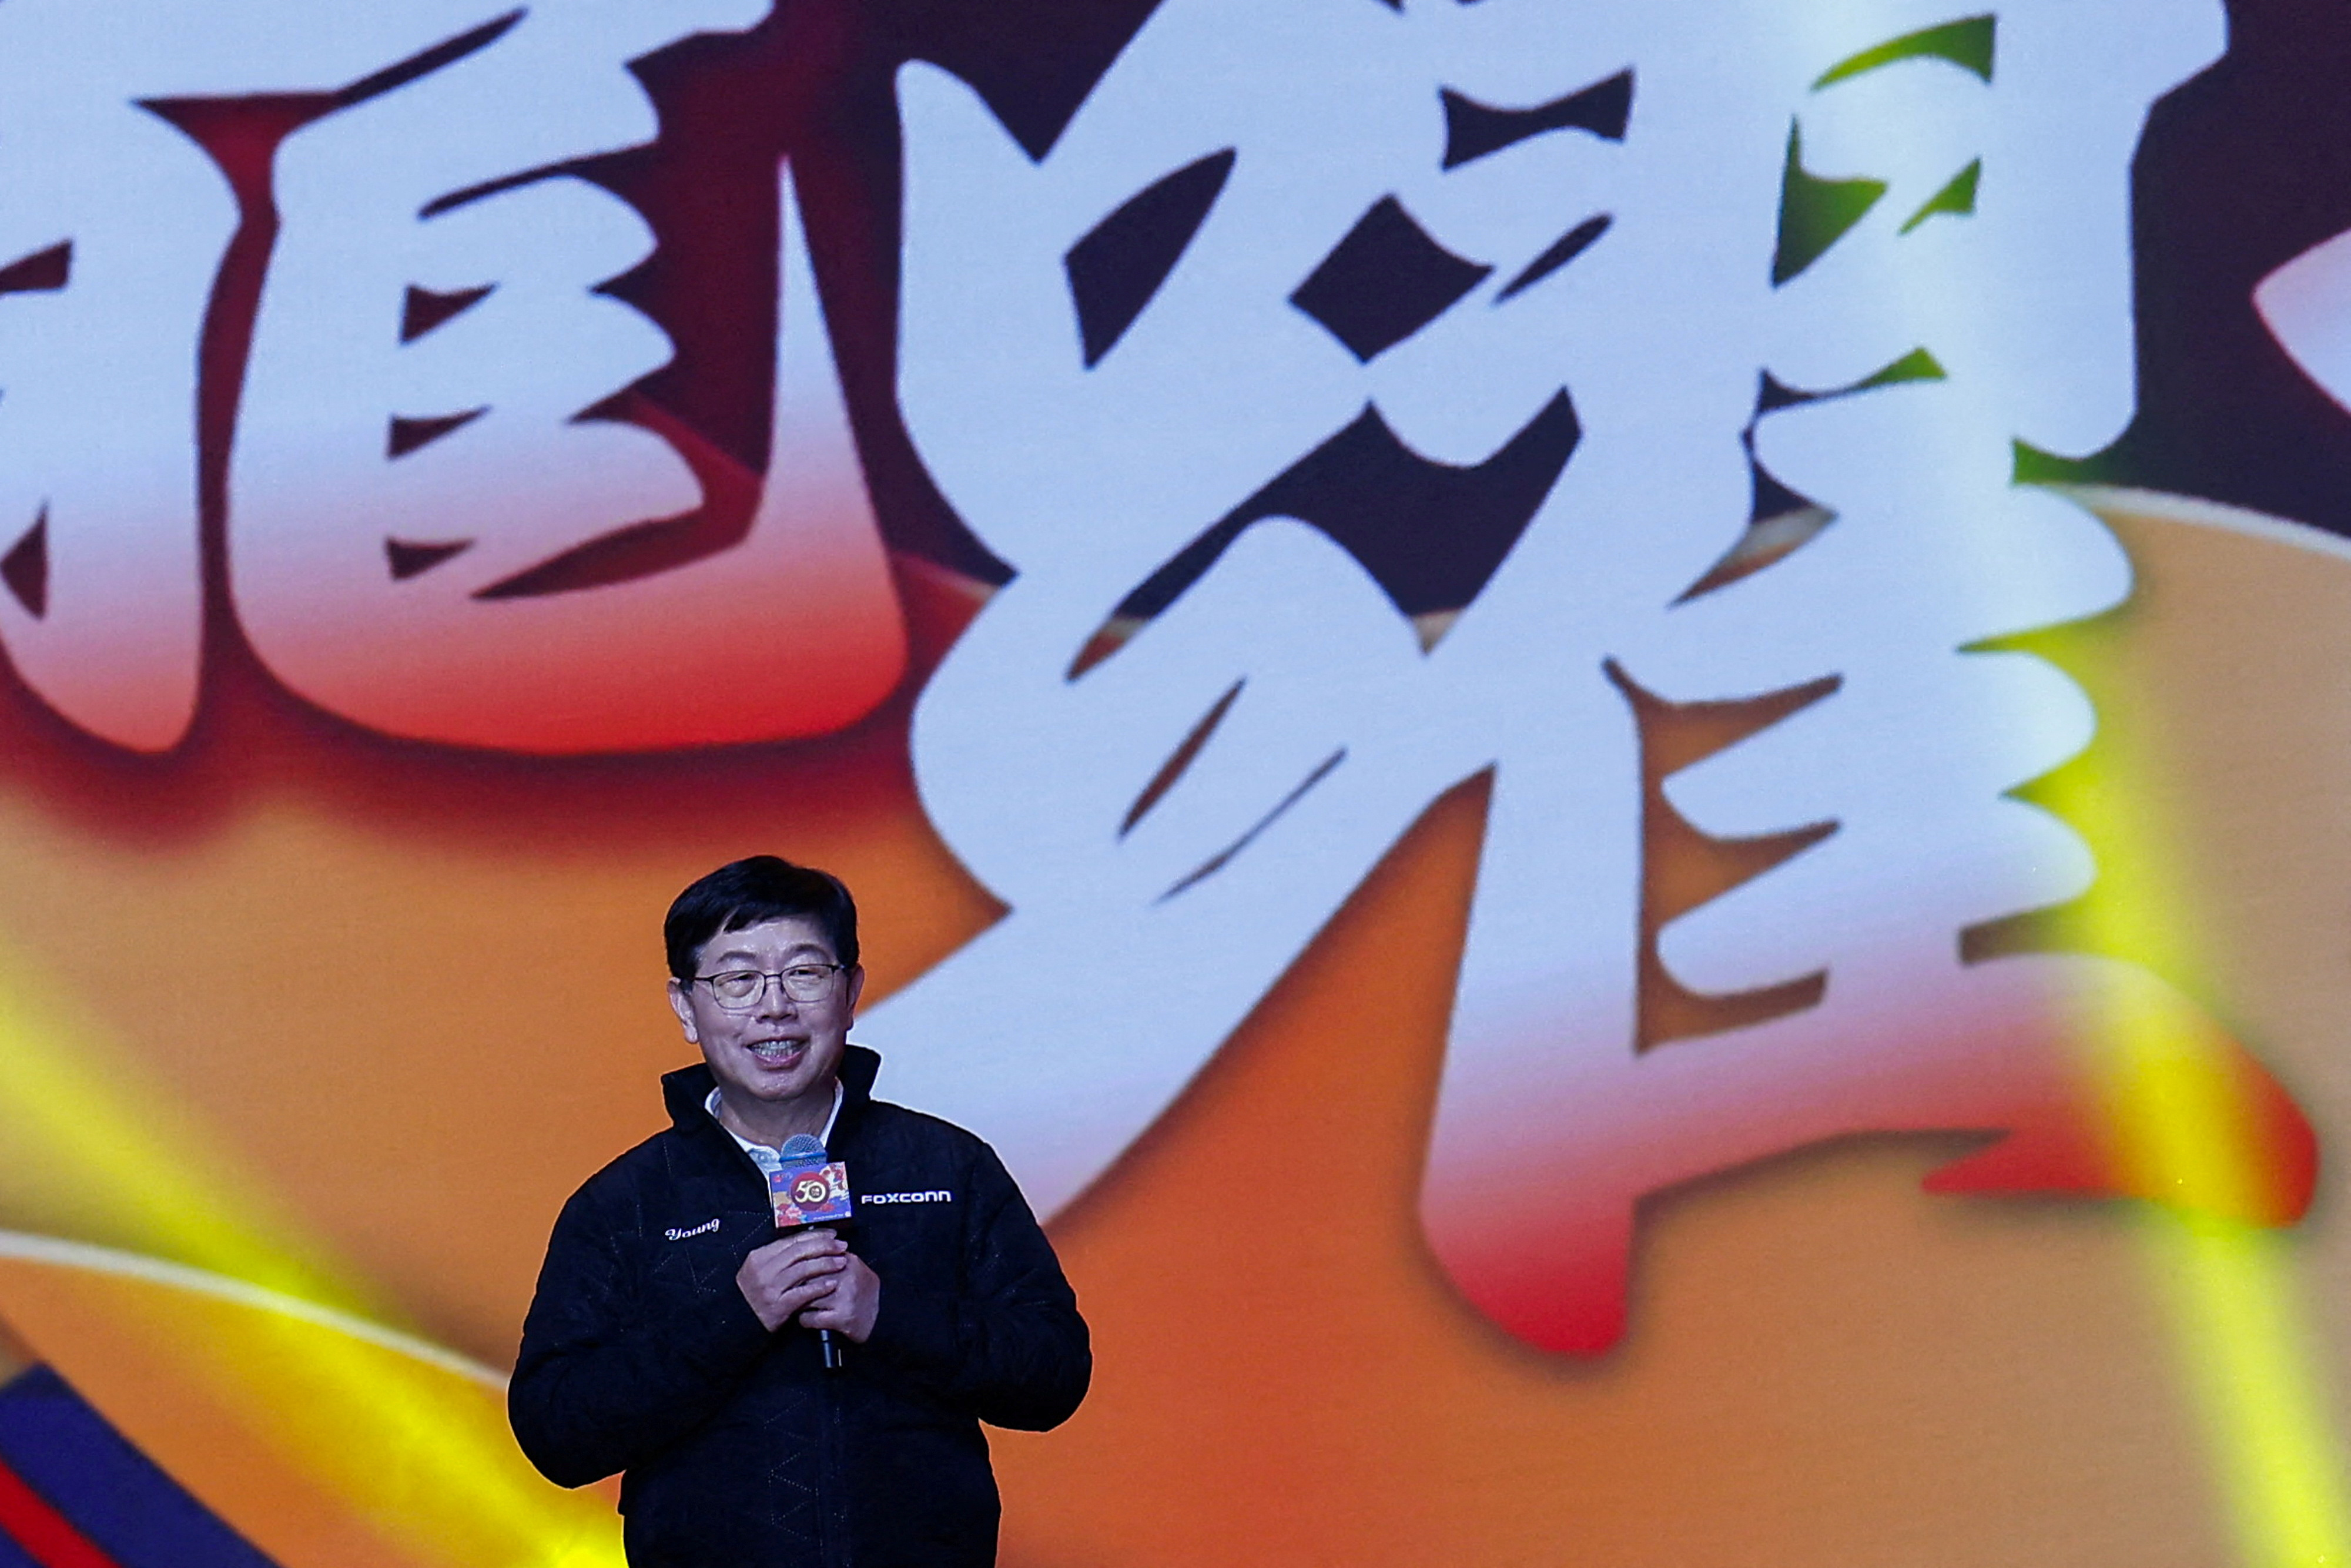 Foxconn's chairman Liu Young-way makes a speech at a year-end company party in Taipei